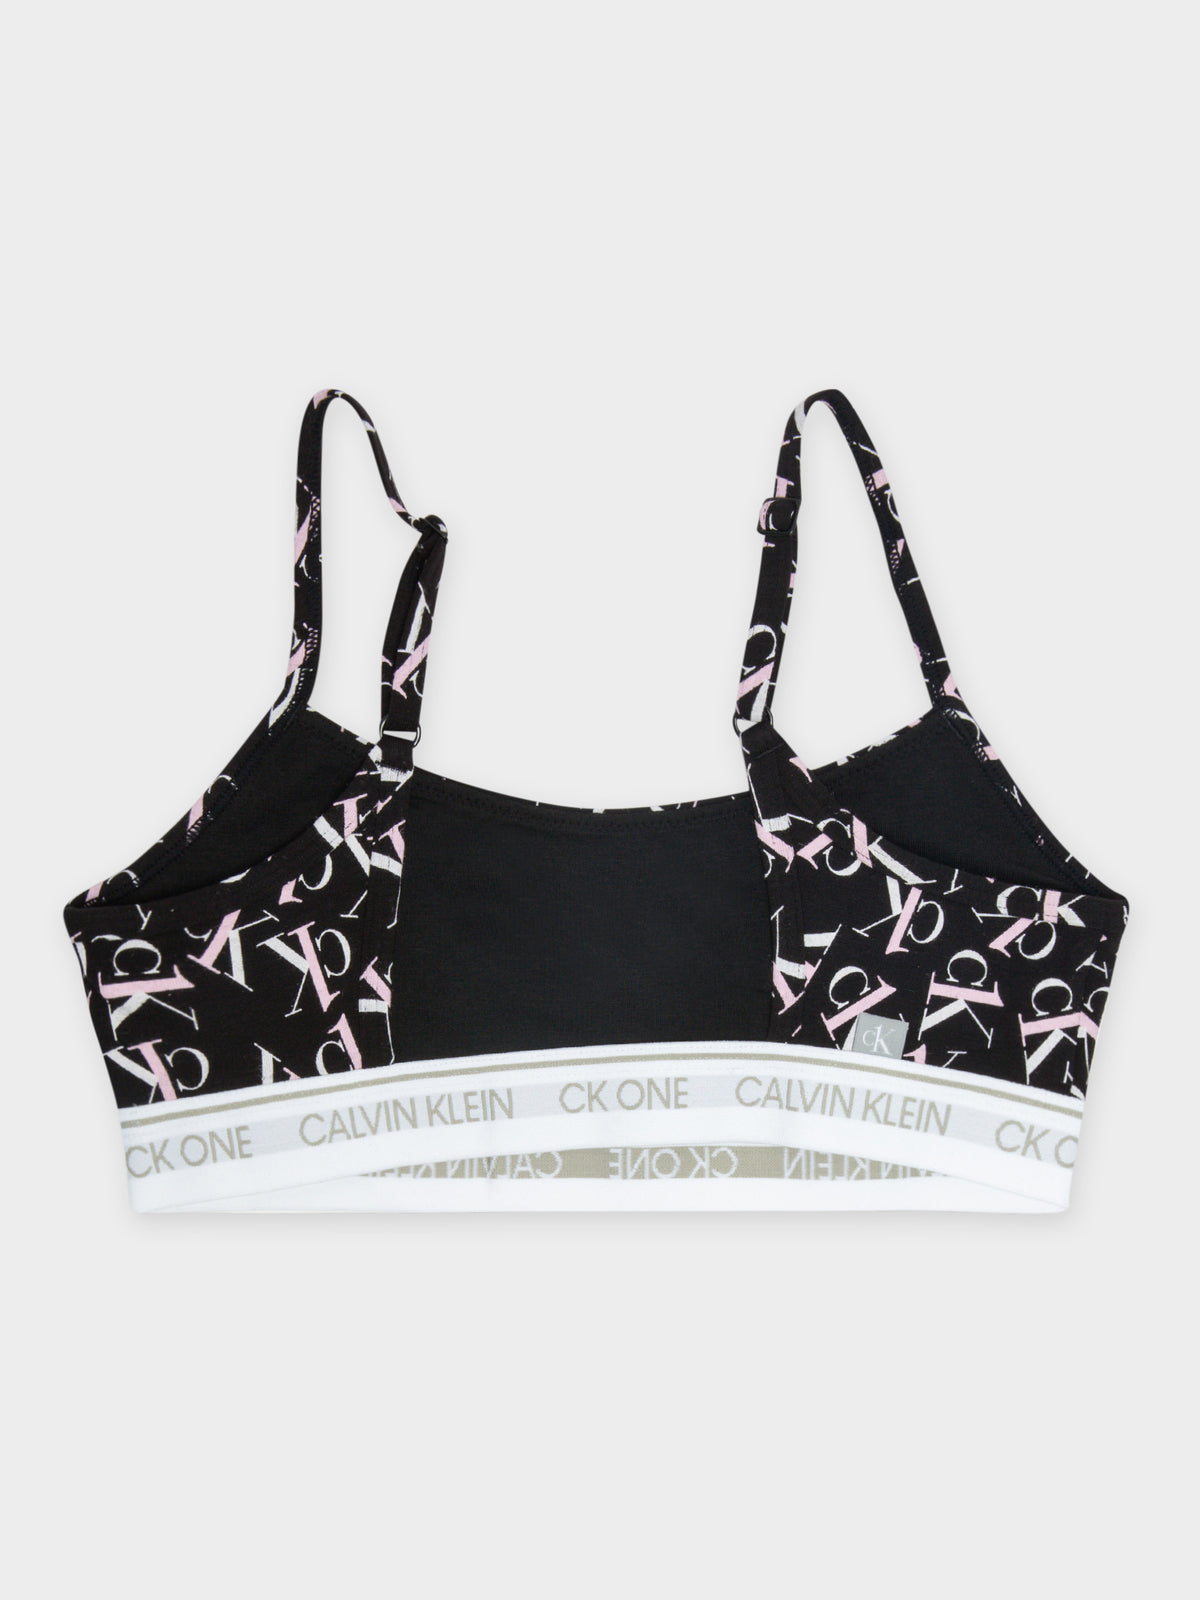 CK One Cotton Unlined Bralette in Black, White &amp; Sand Rose